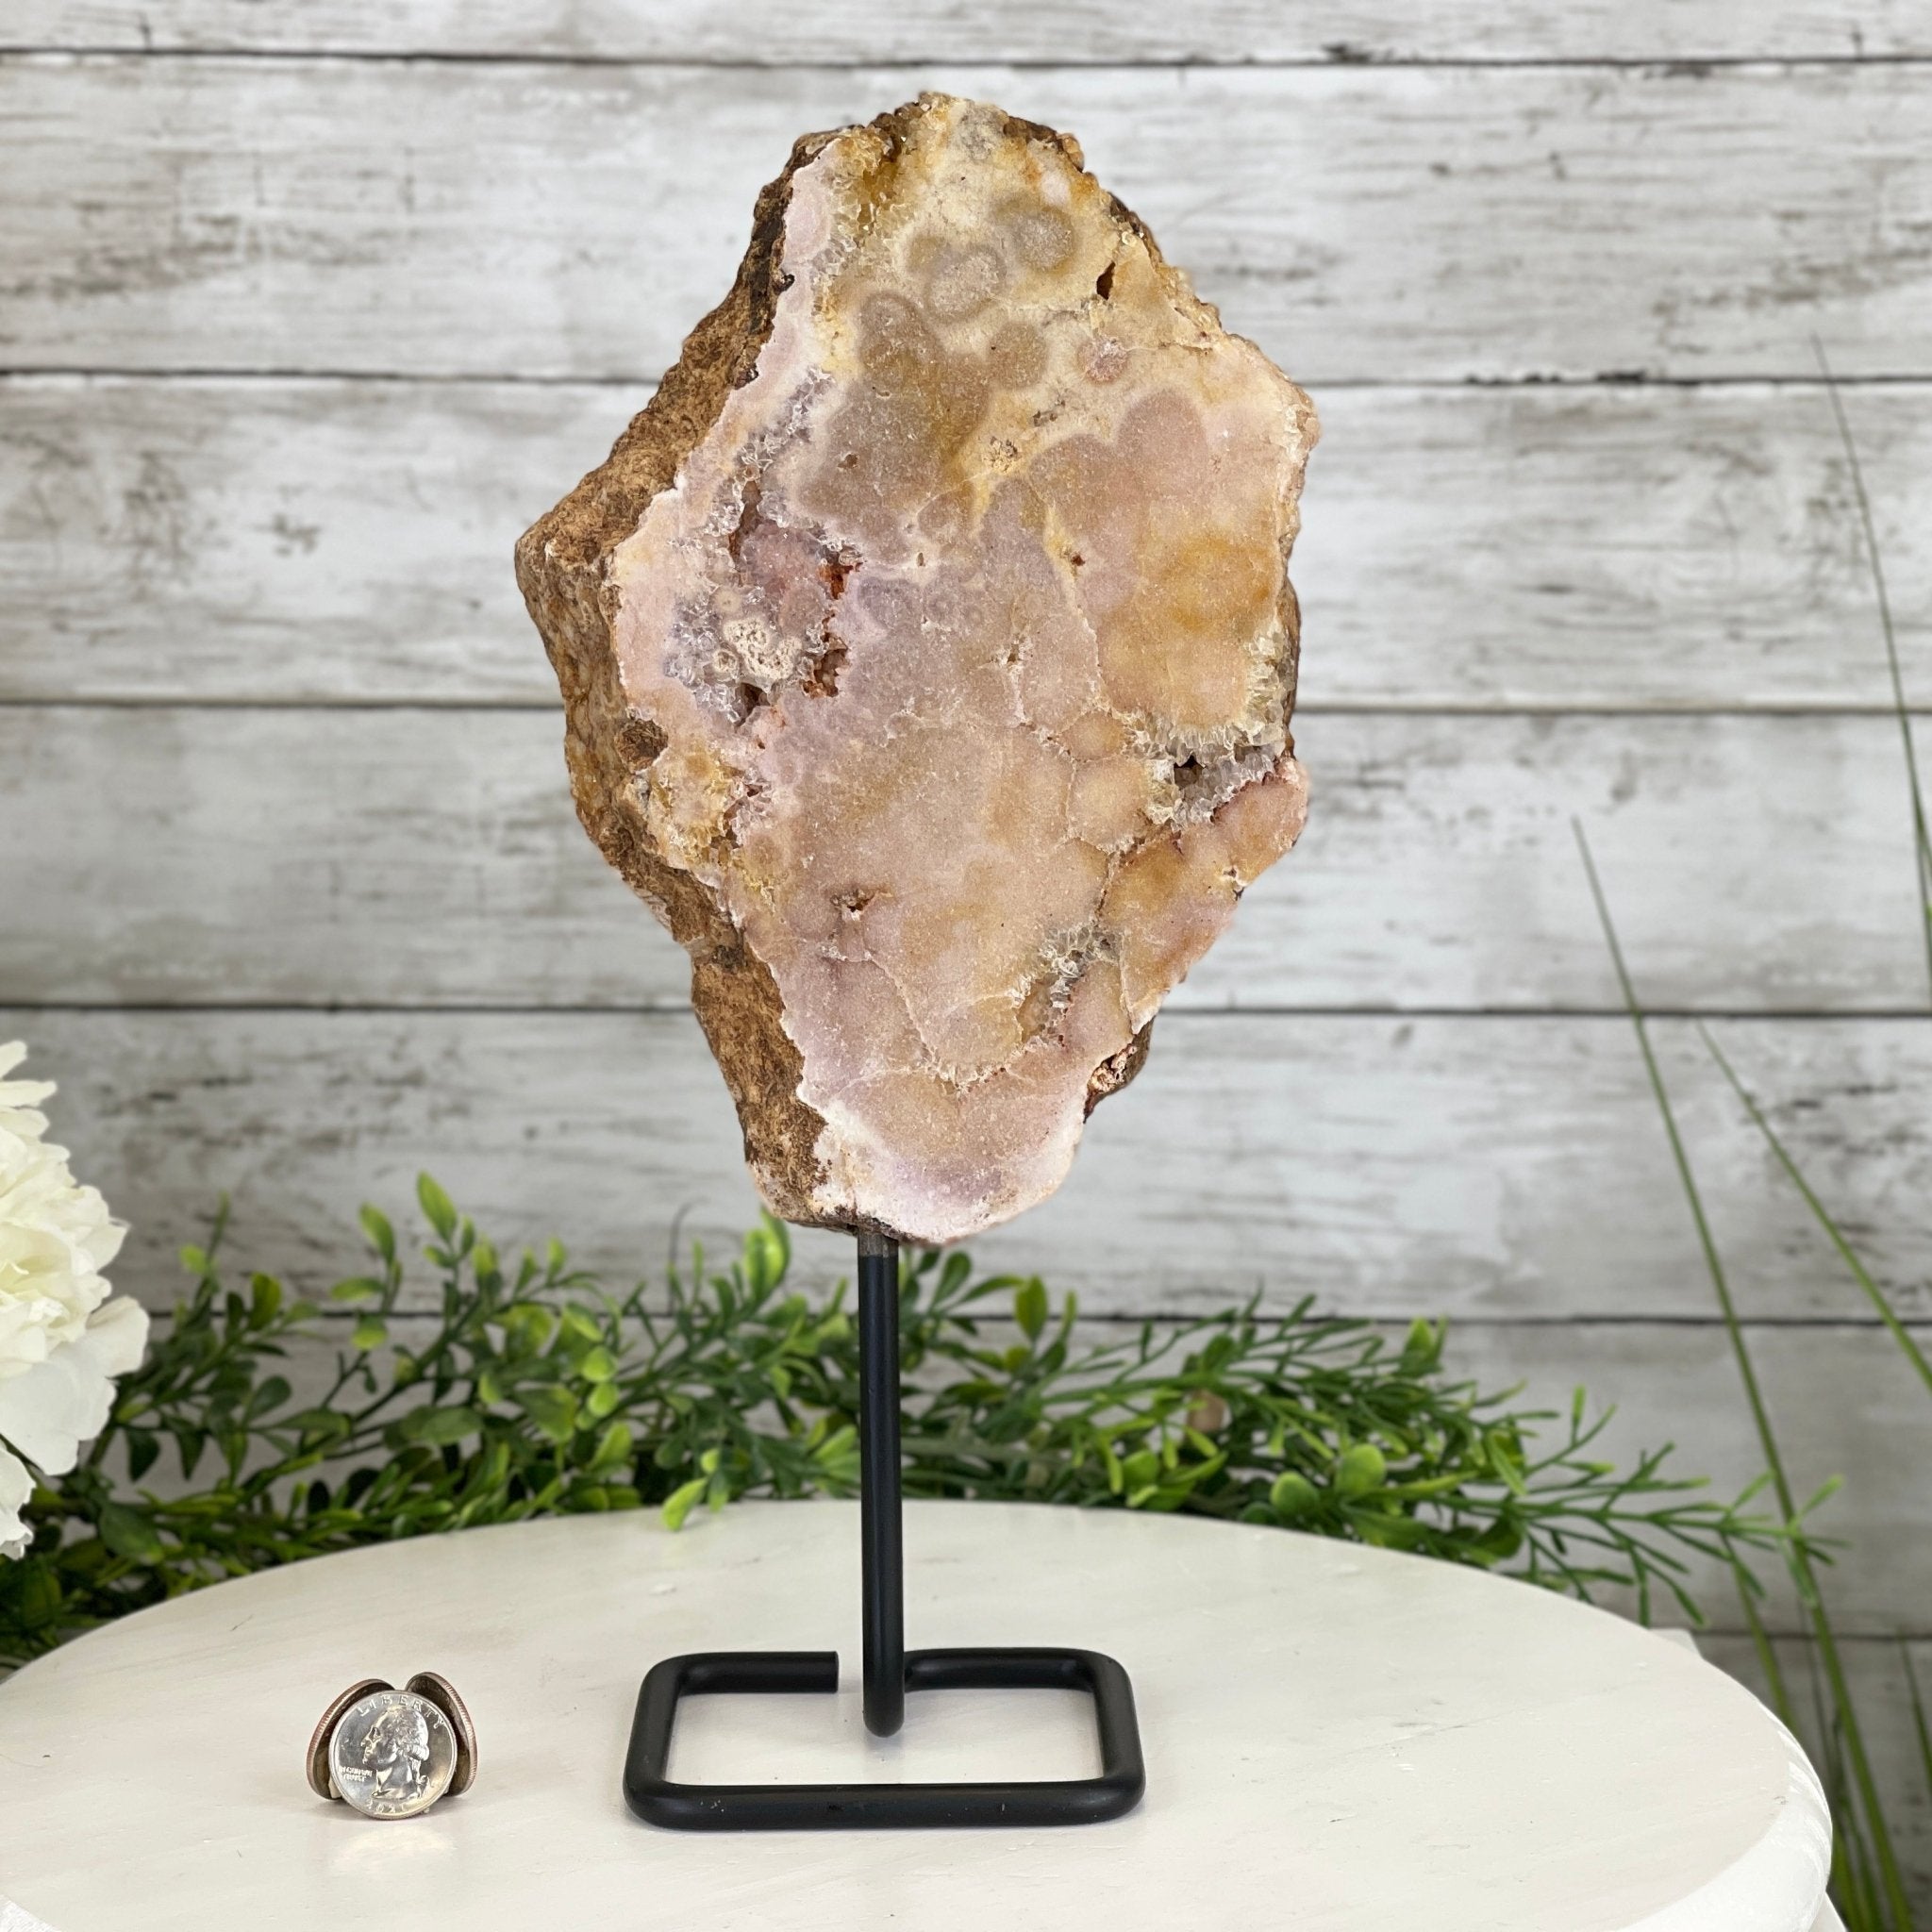 Pink Amethyst Slice on a Stand, 4.4 lbs and 12.75" Tall #5742-0035 by Brazil Gems - Brazil GemsBrazil GemsPink Amethyst Slice on a Stand, 4.4 lbs and 12.75" Tall #5742-0035 by Brazil GemsSlices on Fixed Bases5742-0035